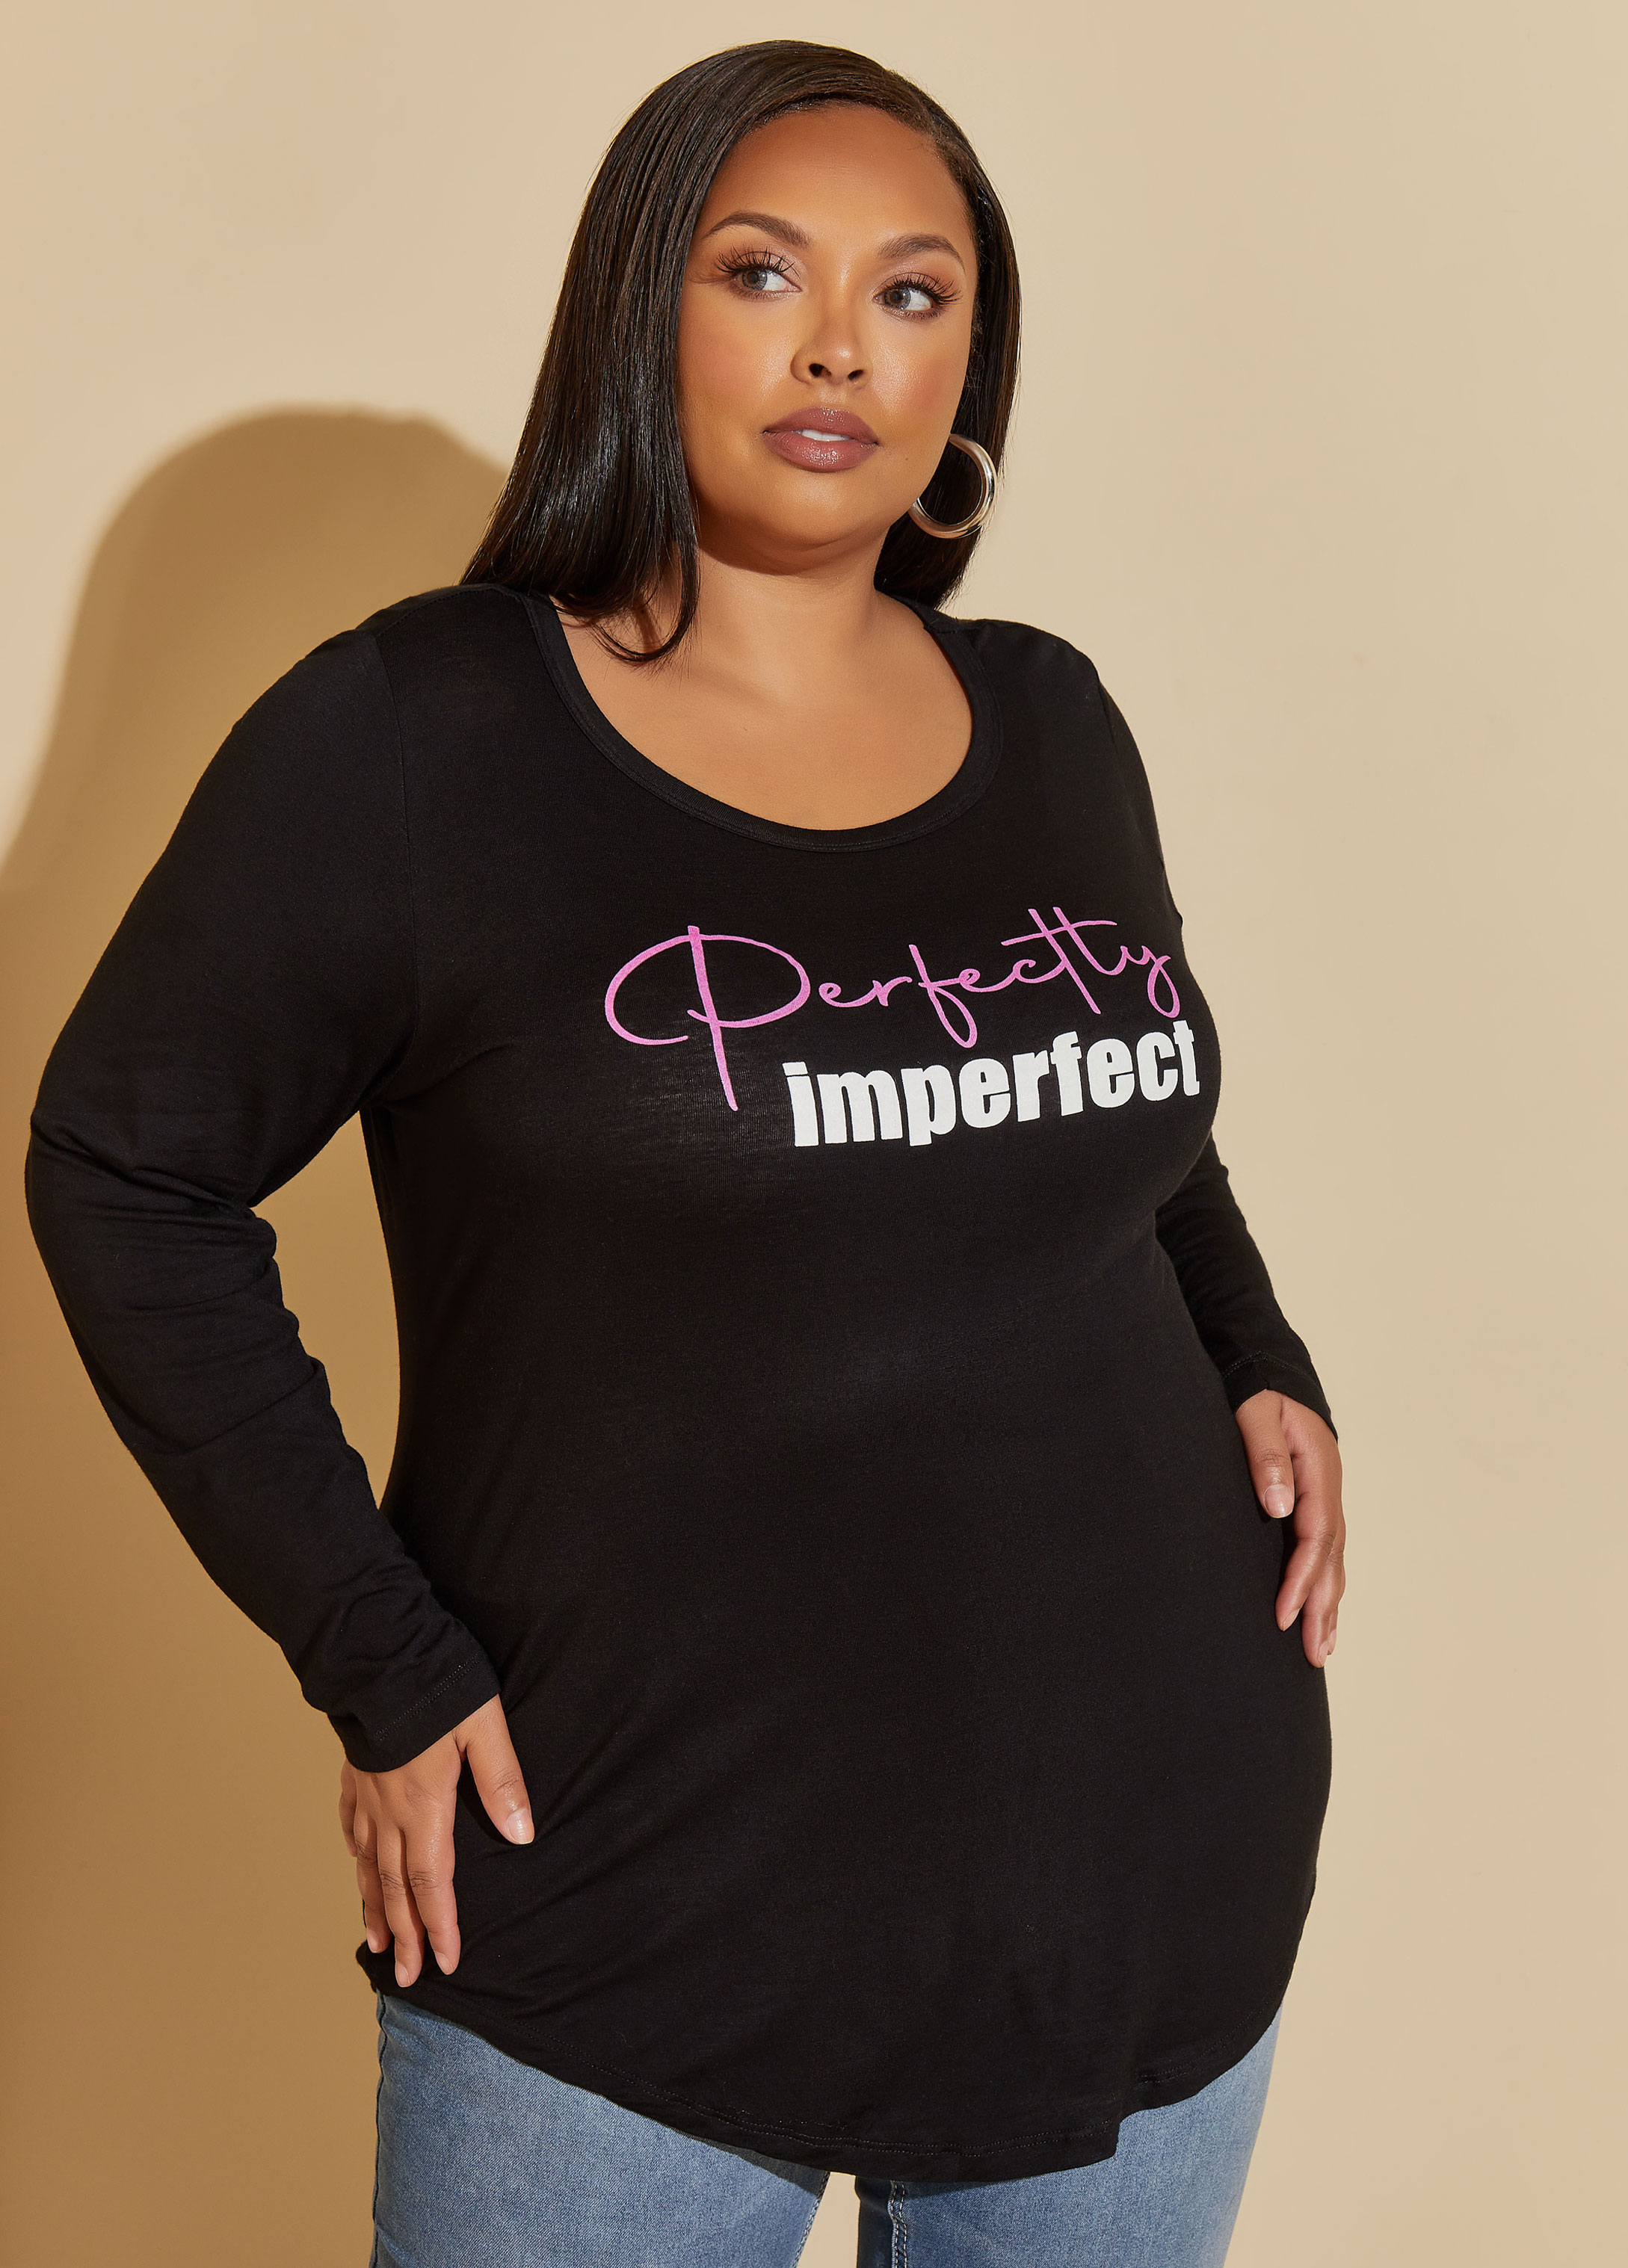 Plus Size Perfectly Imperfect Graphic Tee, BLACK, 22/24 - Ashley Stewart